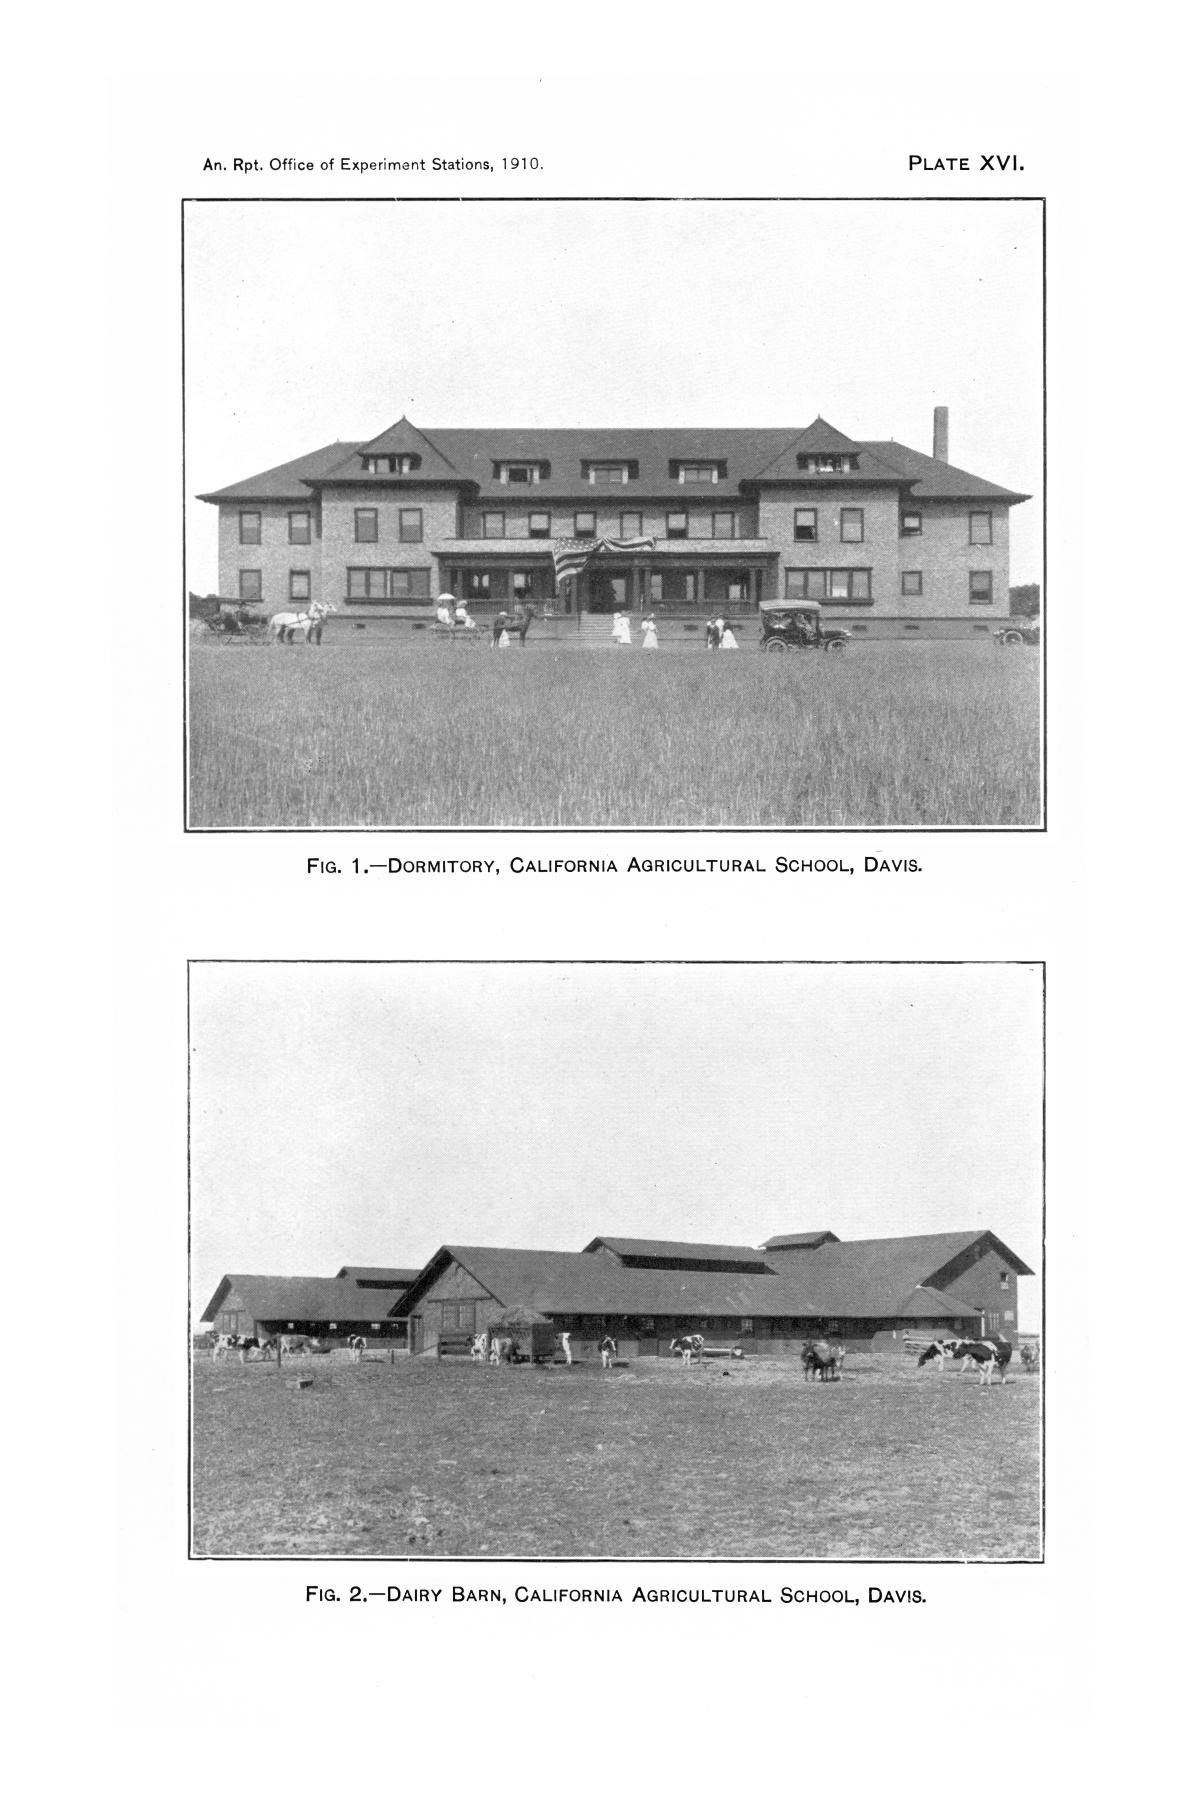 Annual Report of the Office of Experiment Stations, June 30, 1910
                                                
                                                    None
                                                